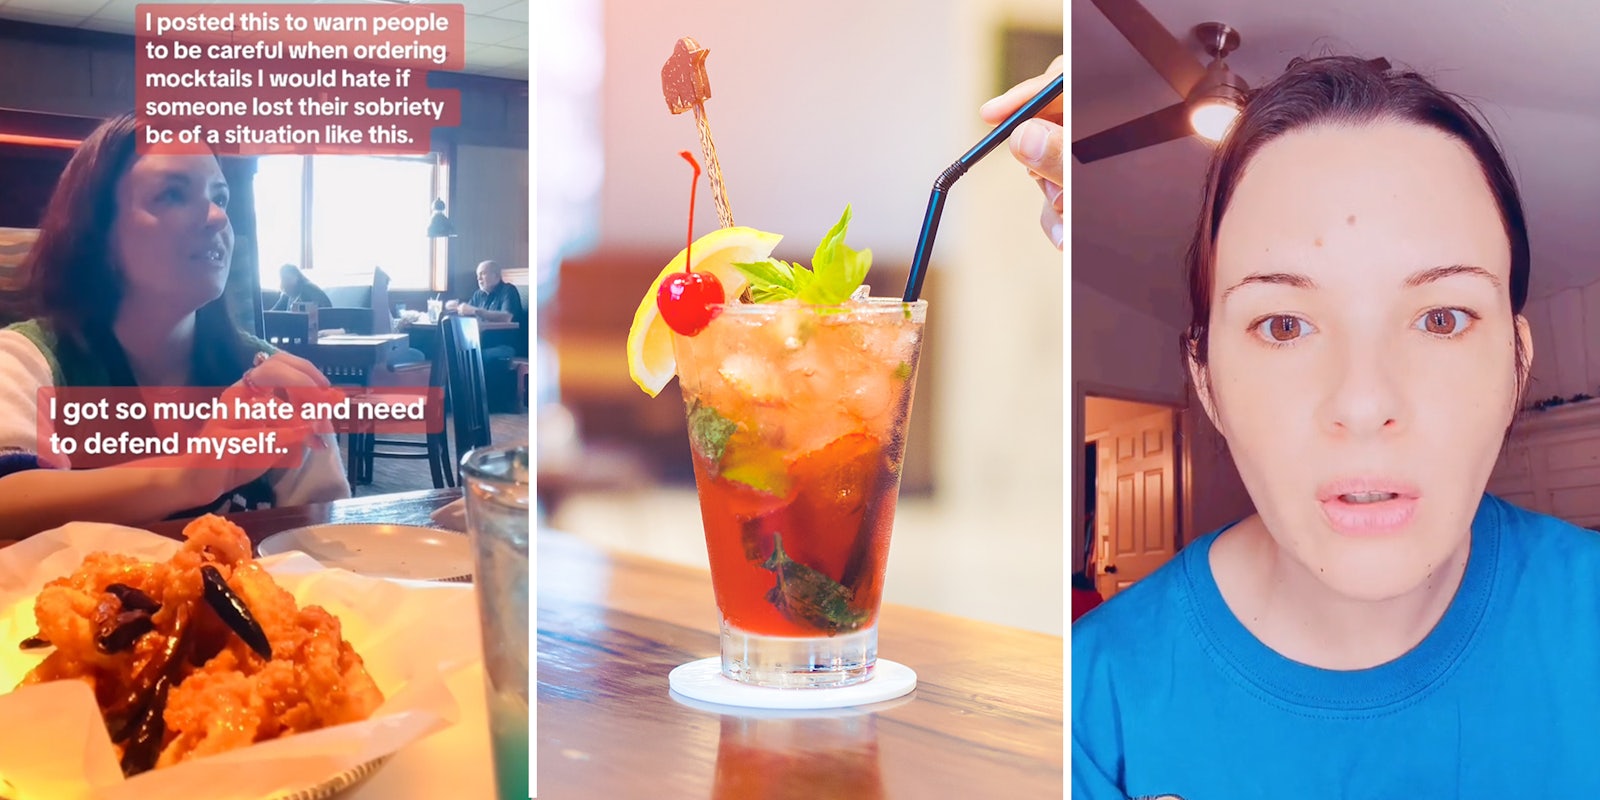 Woman orders a mocktail for her 12-year-old, server brings out spiked drink